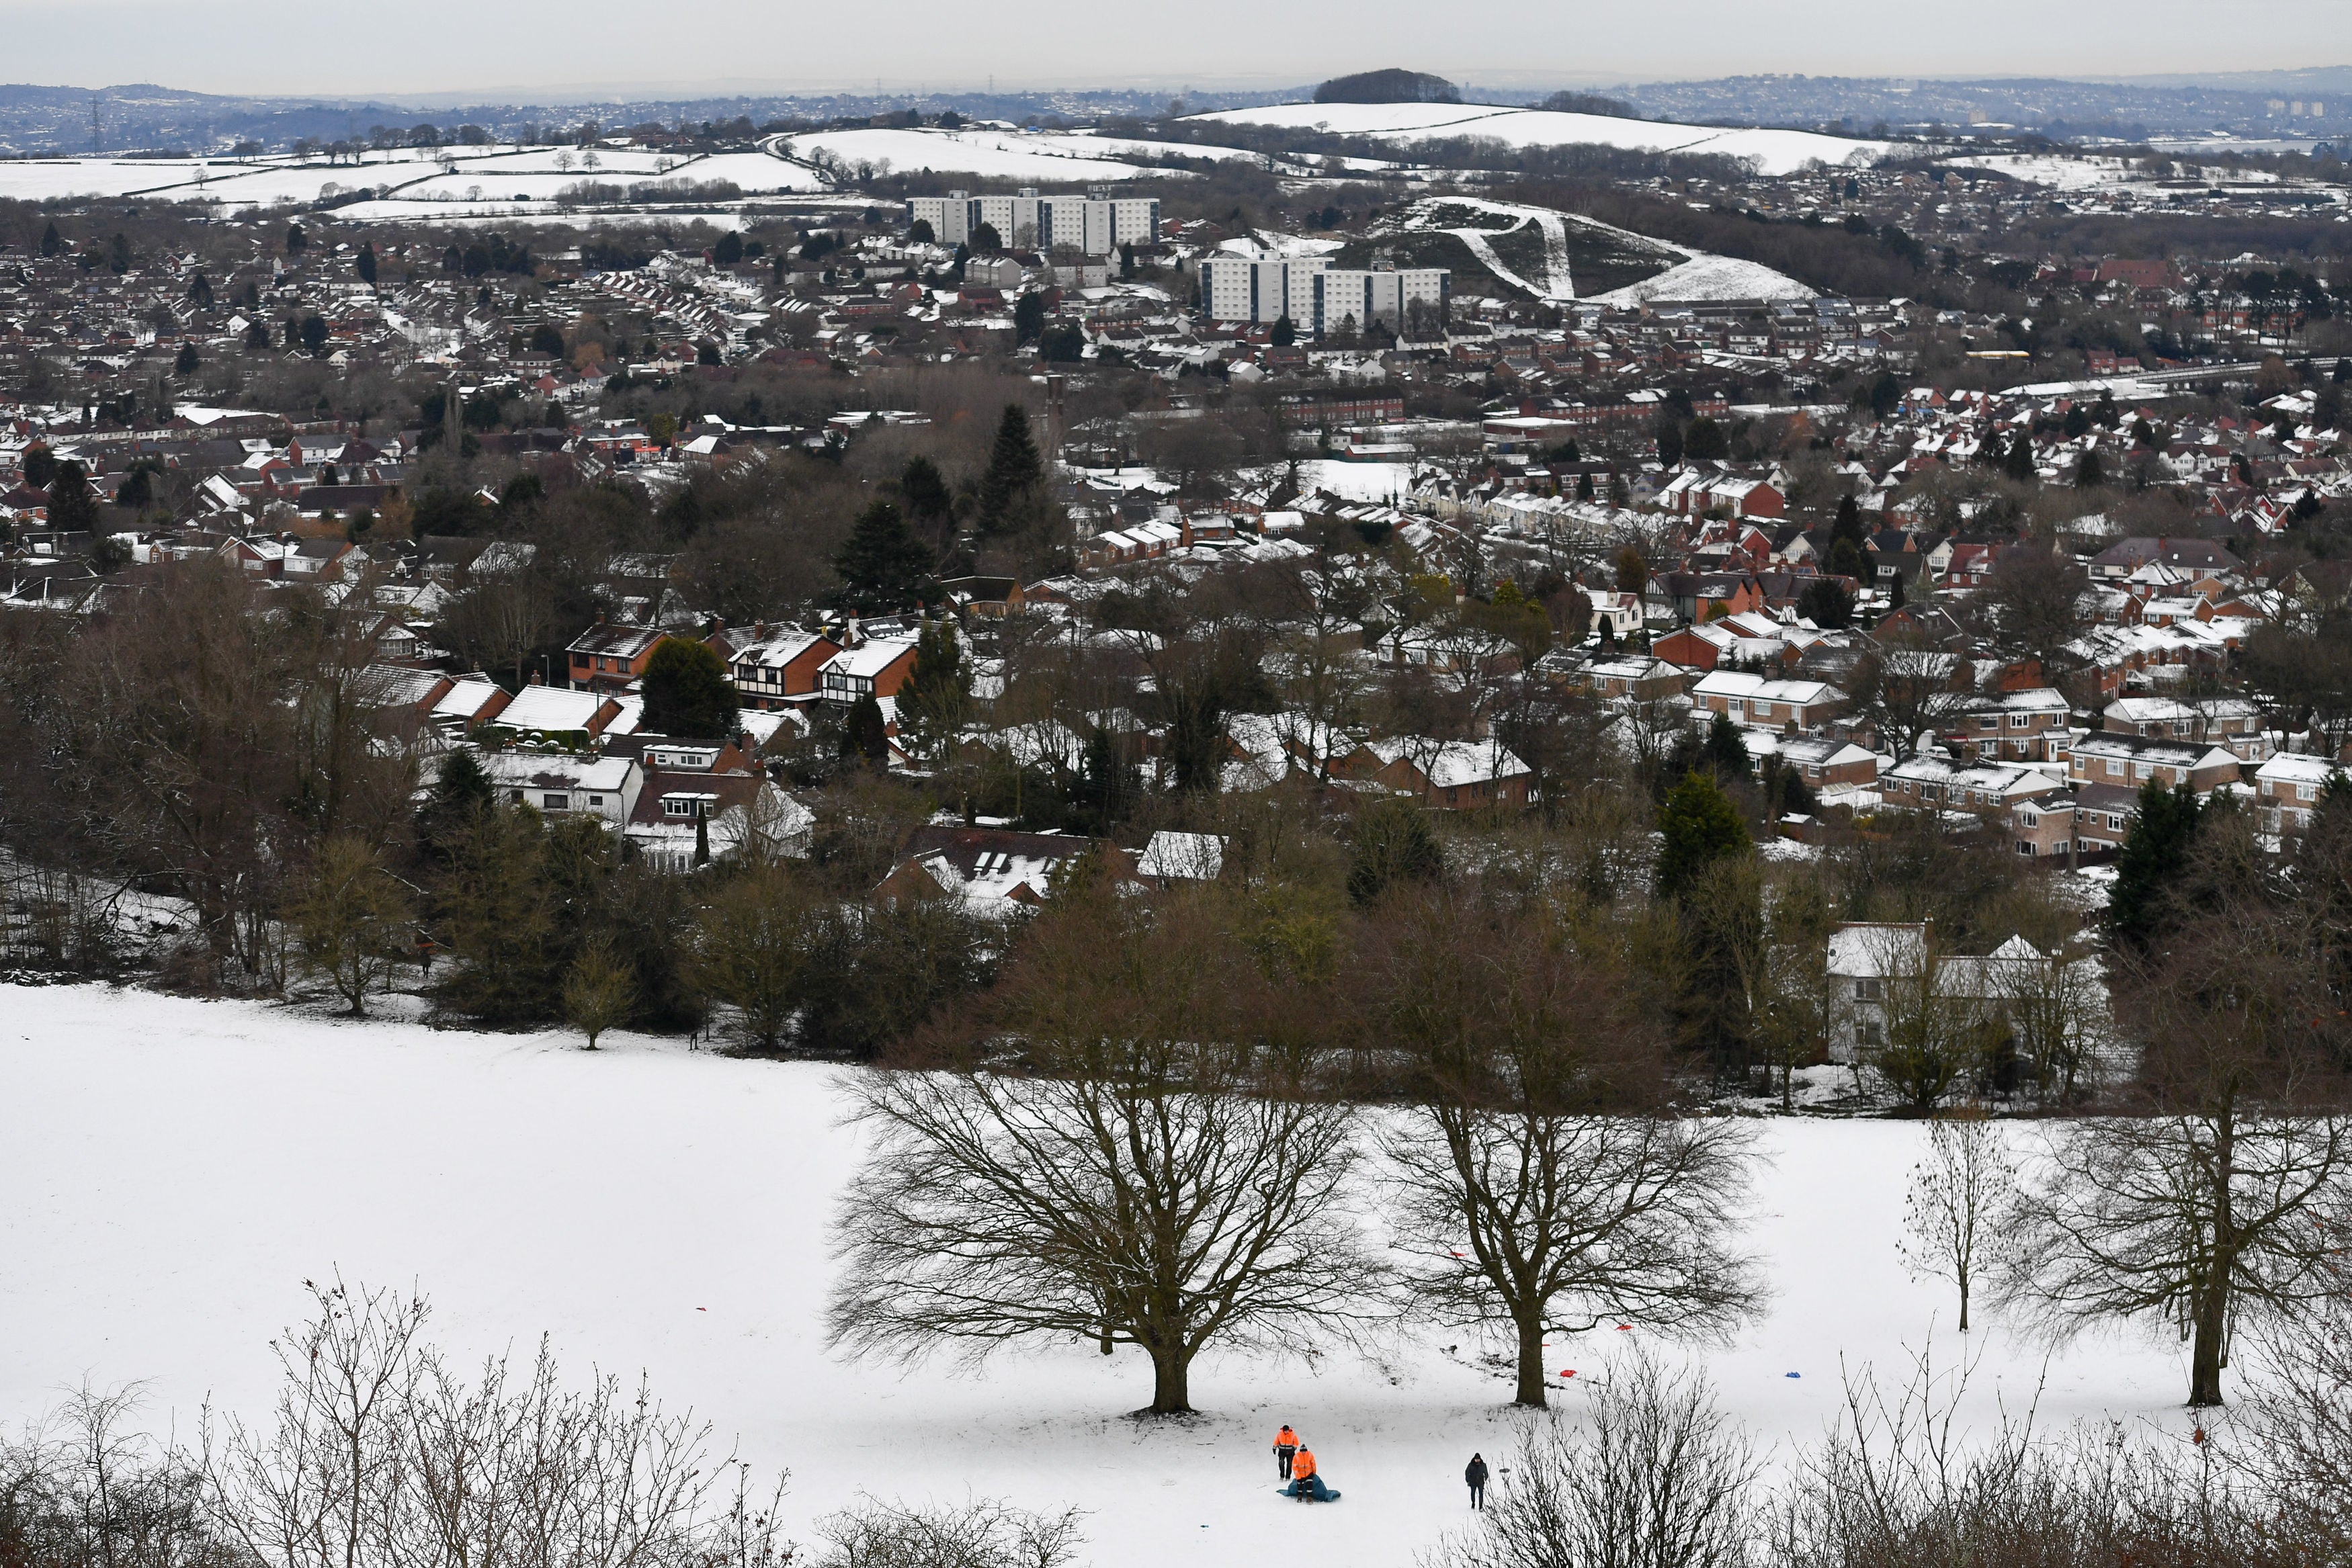 Large areas of the UK were covered in snow last week